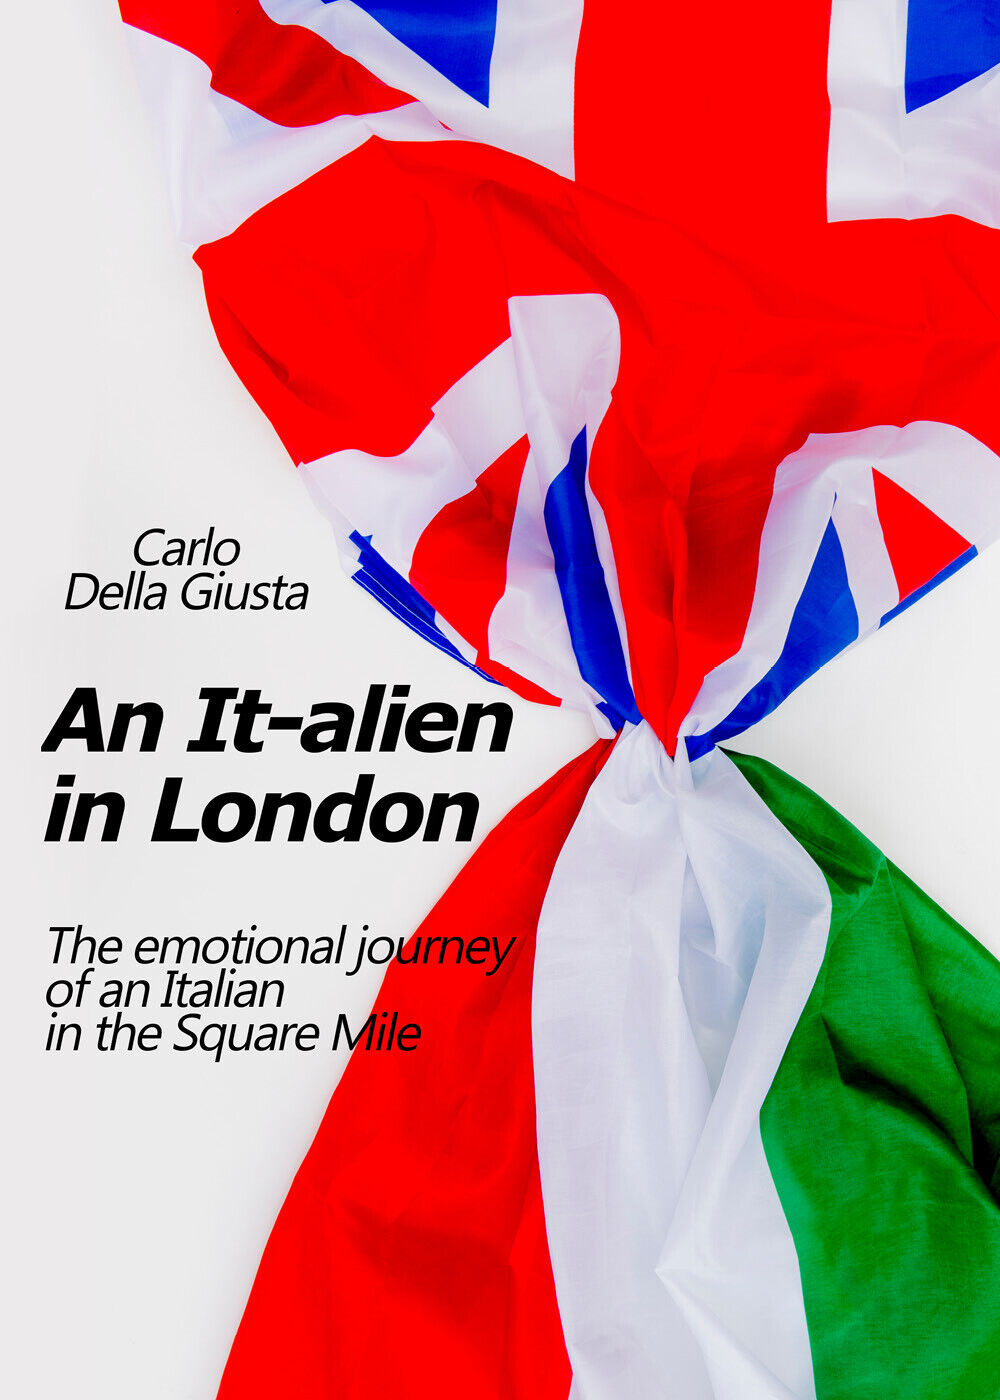 An It-alien in London. The emotional journey of an Italian in the Square  - ER